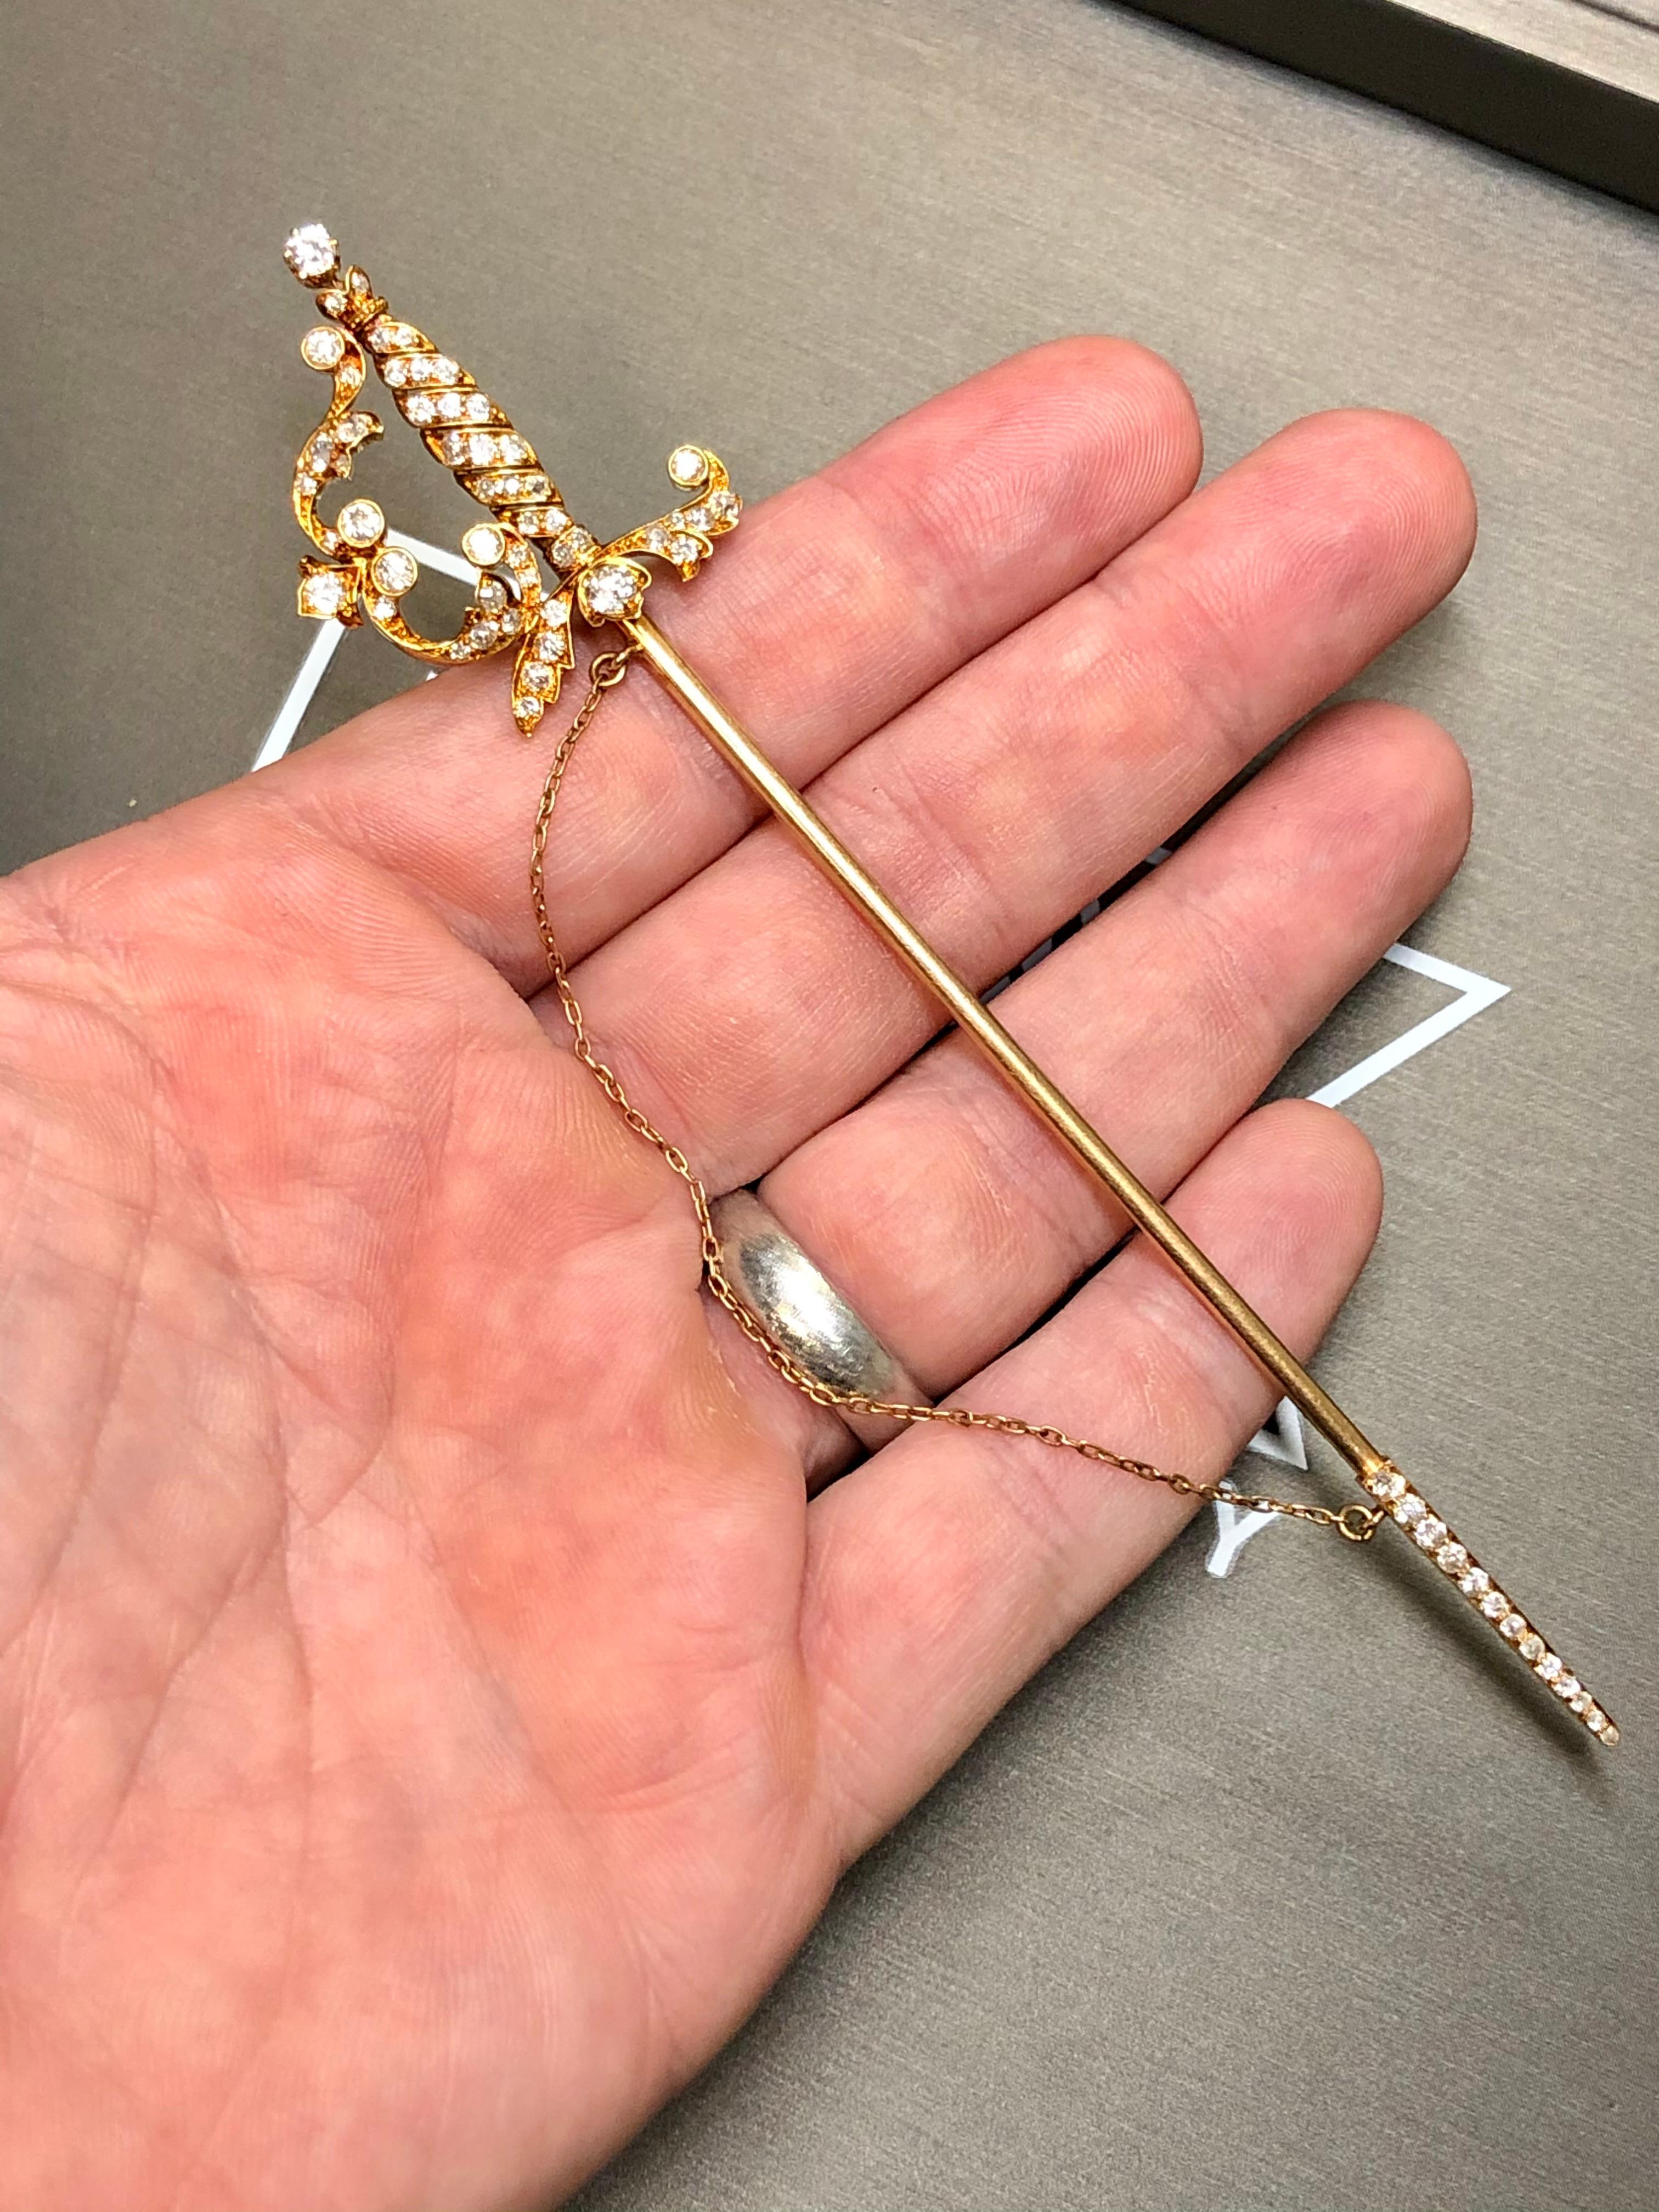 A Victorian saber jabot done in 18K (pin portion is 14k for rigidity) set with approximately 2.30cttw in G-J color Vs1-Si1 clarity original old mine cut diamonds.


Dimensions/Weight:

Jabot measures 5.6” long and weighs 14.4g.


Condition:

All